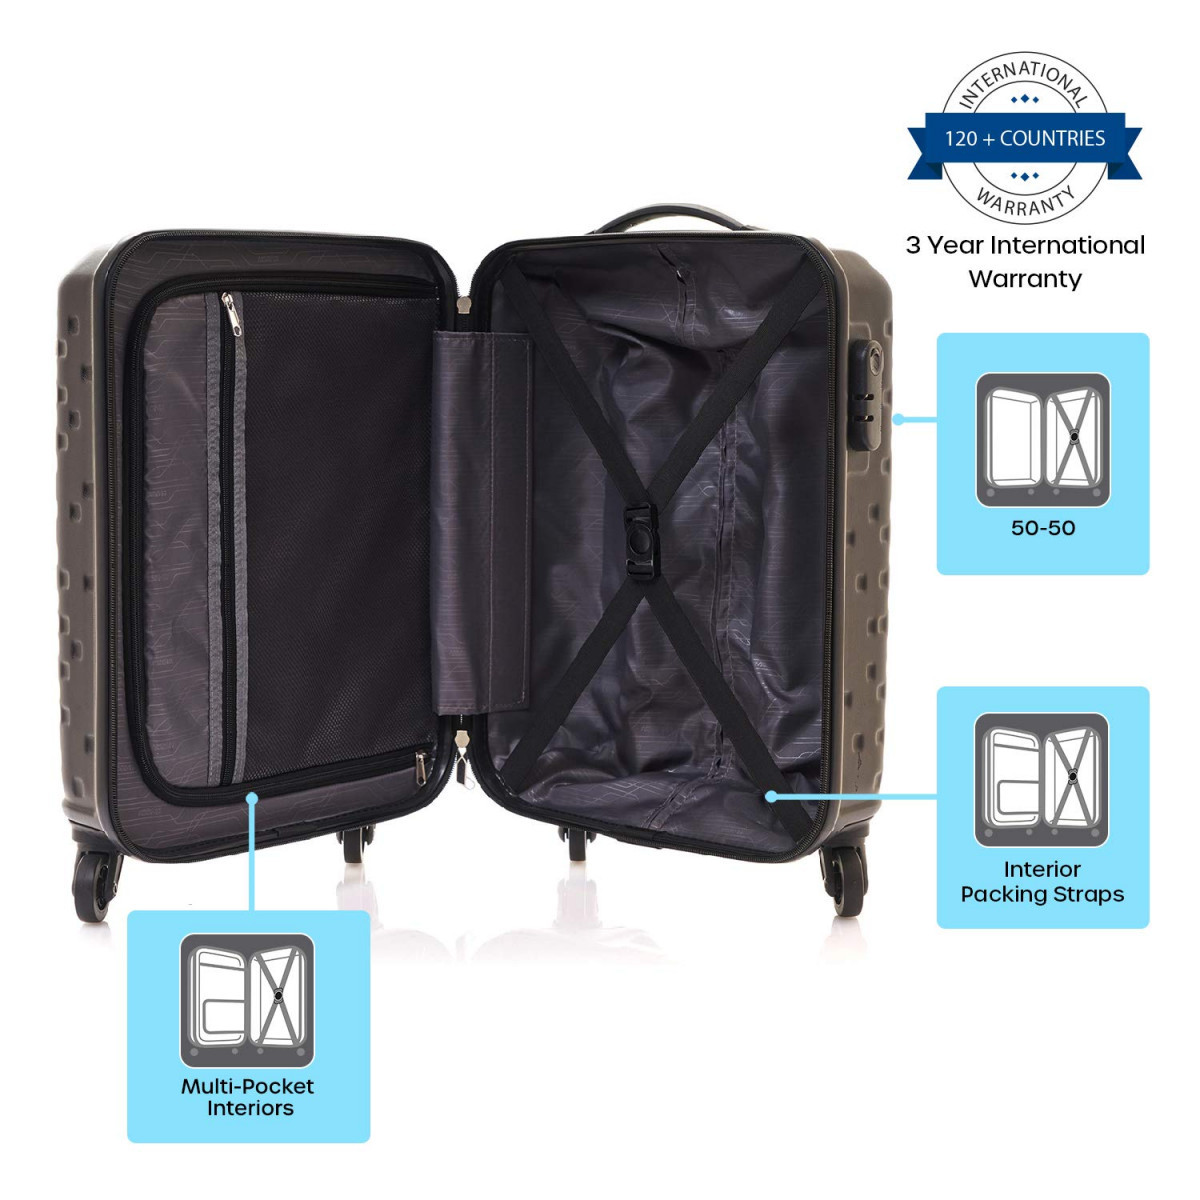 American Tourister Polyester 3149 Inches Hard Carry-On SpeedWheel 8 Wheel Suitcase An6 0 01 001Black Medium 80 Centimeters